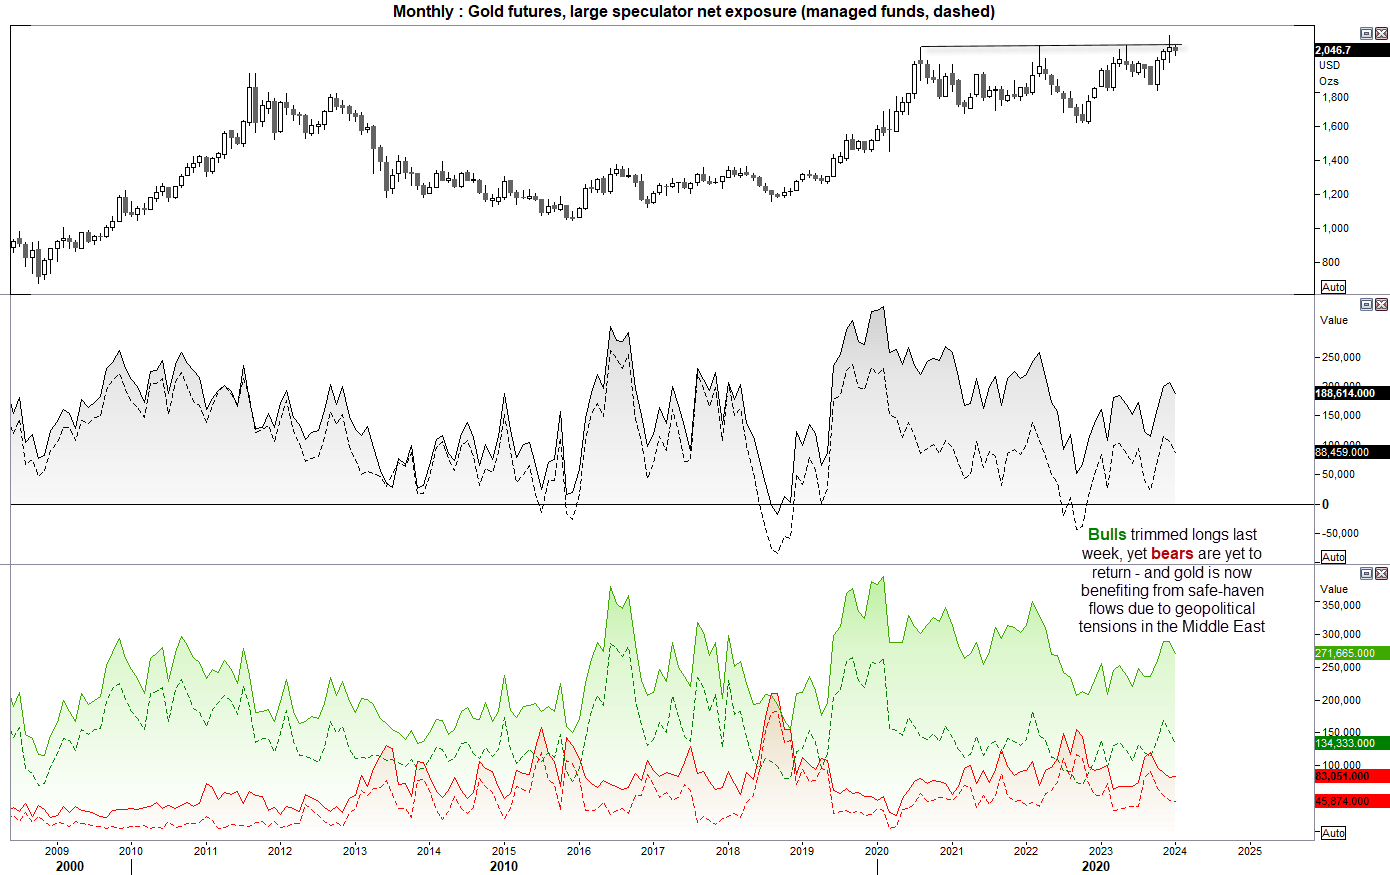 Monthly: Gold futures, large speculator net exposure (managed funds, dashed)